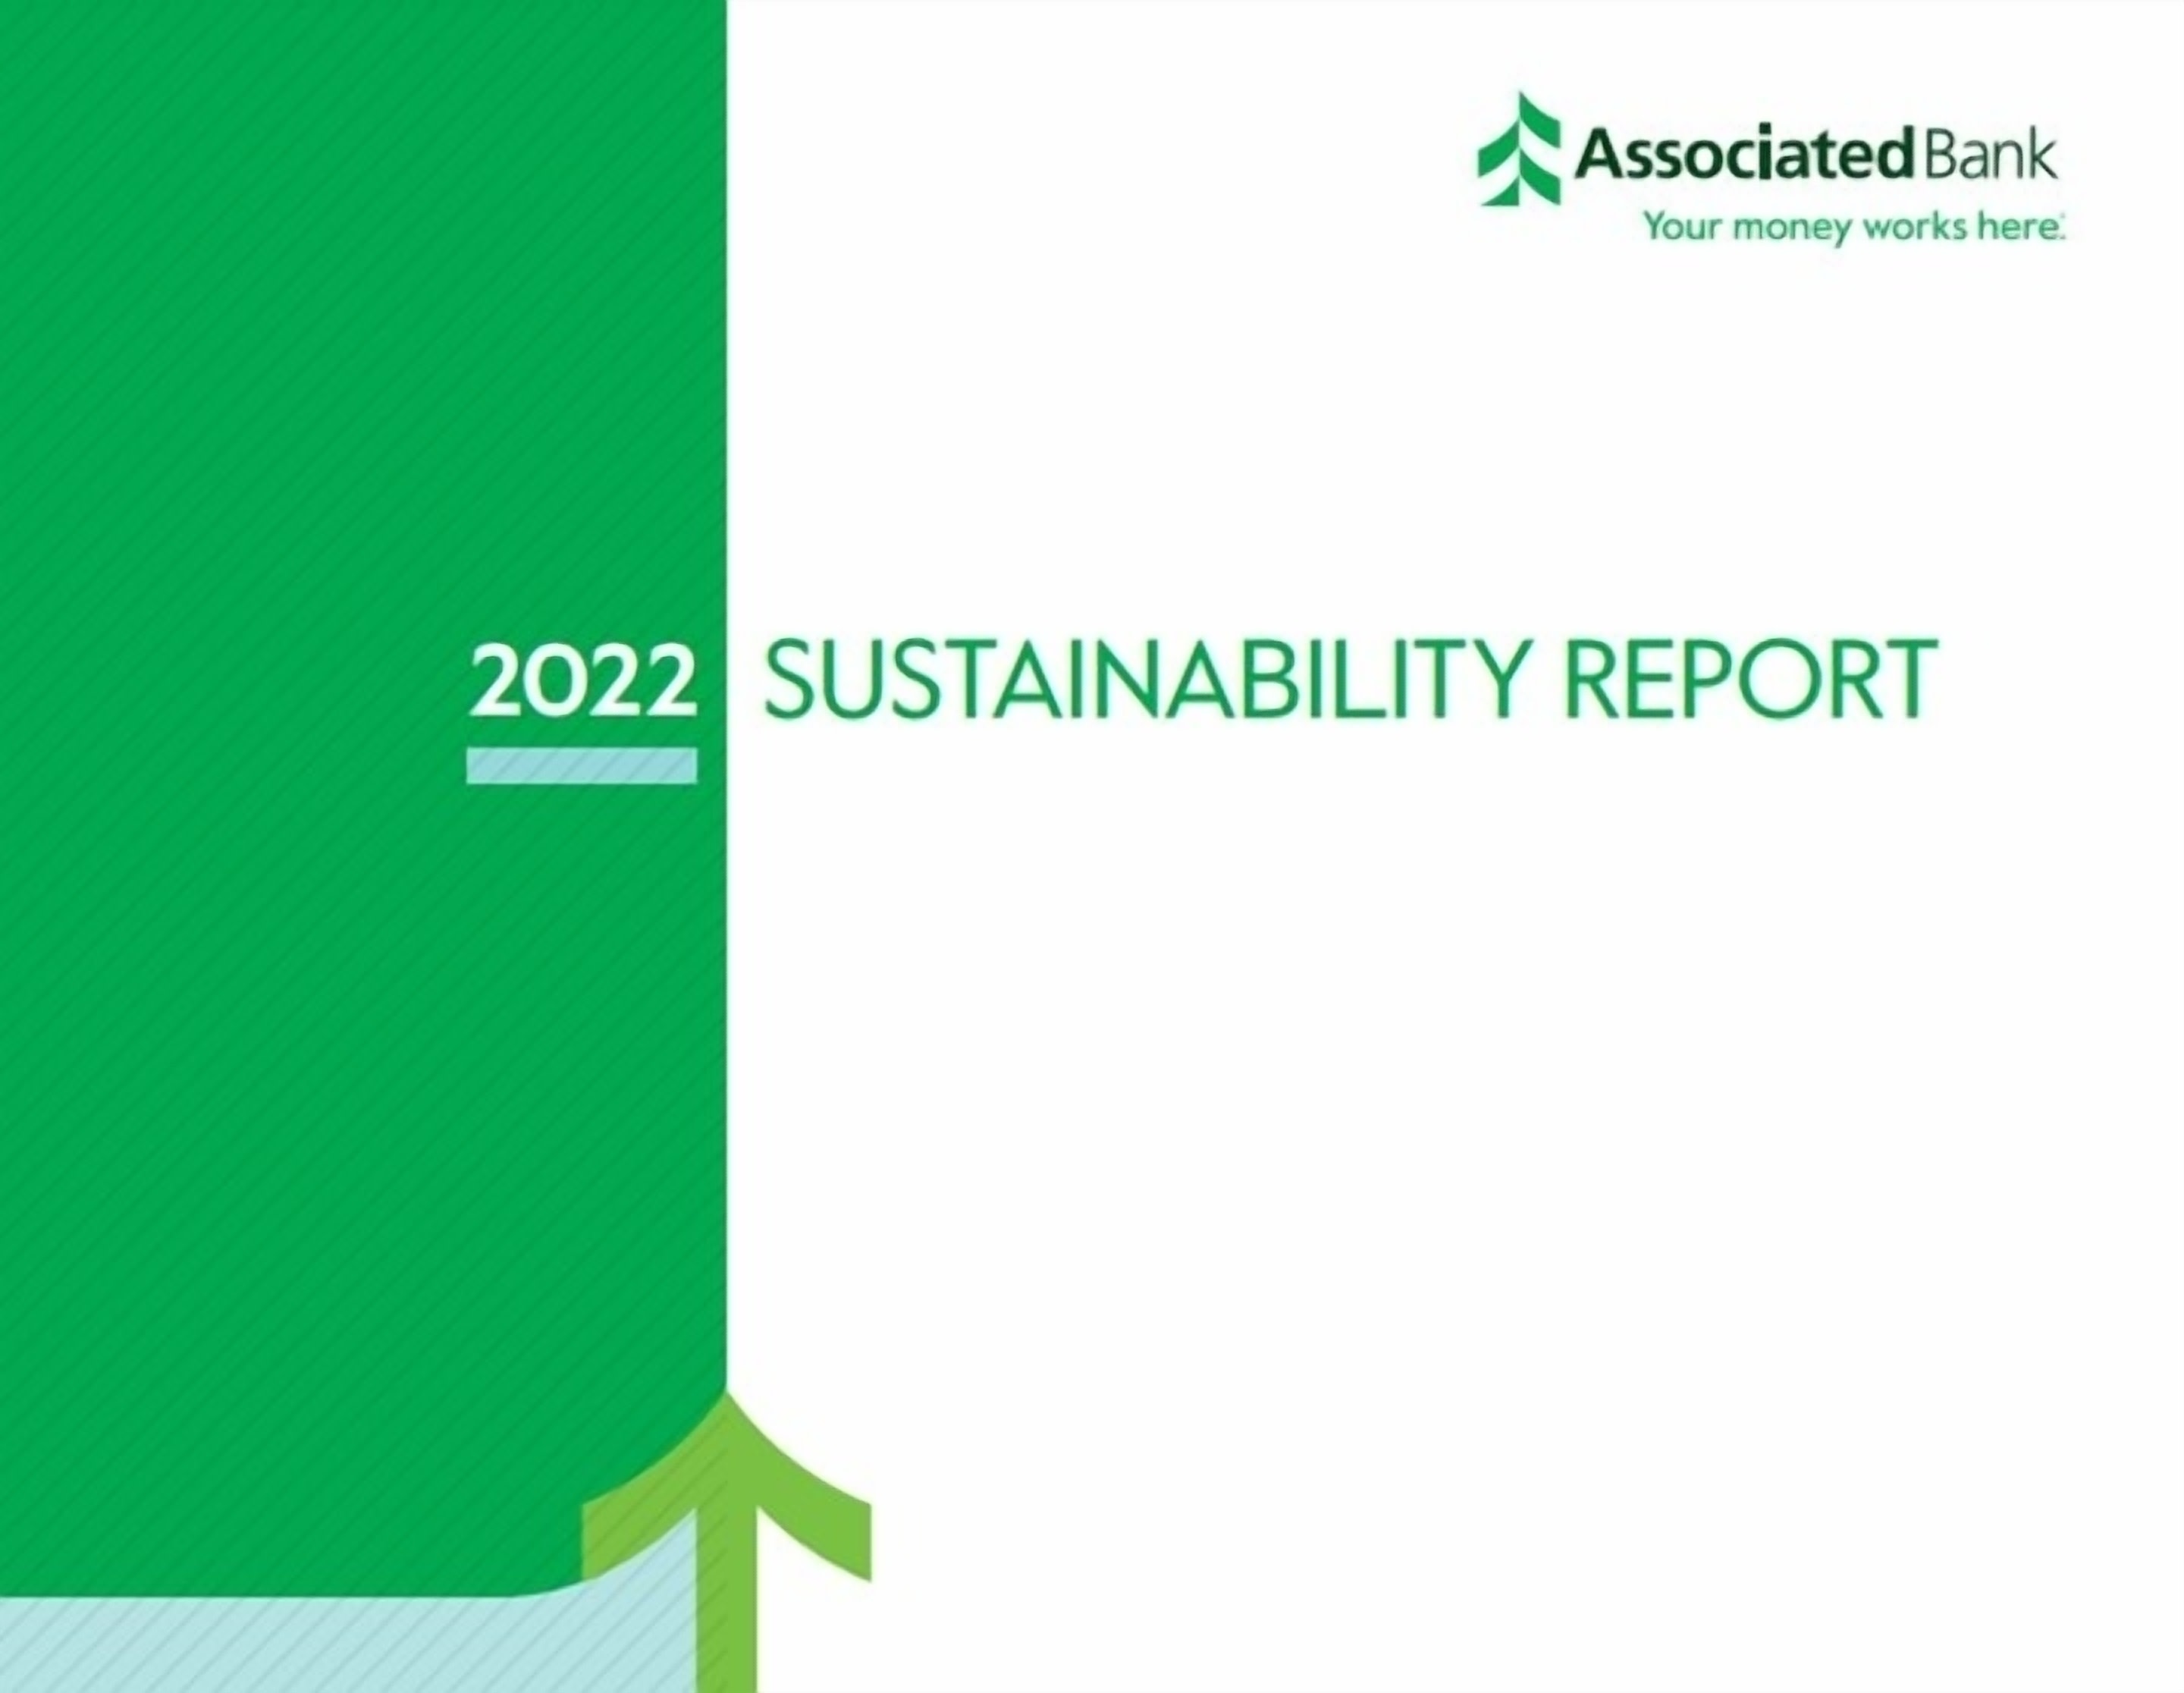 KnowESG_Associated Bank's Commitment to Sustainability